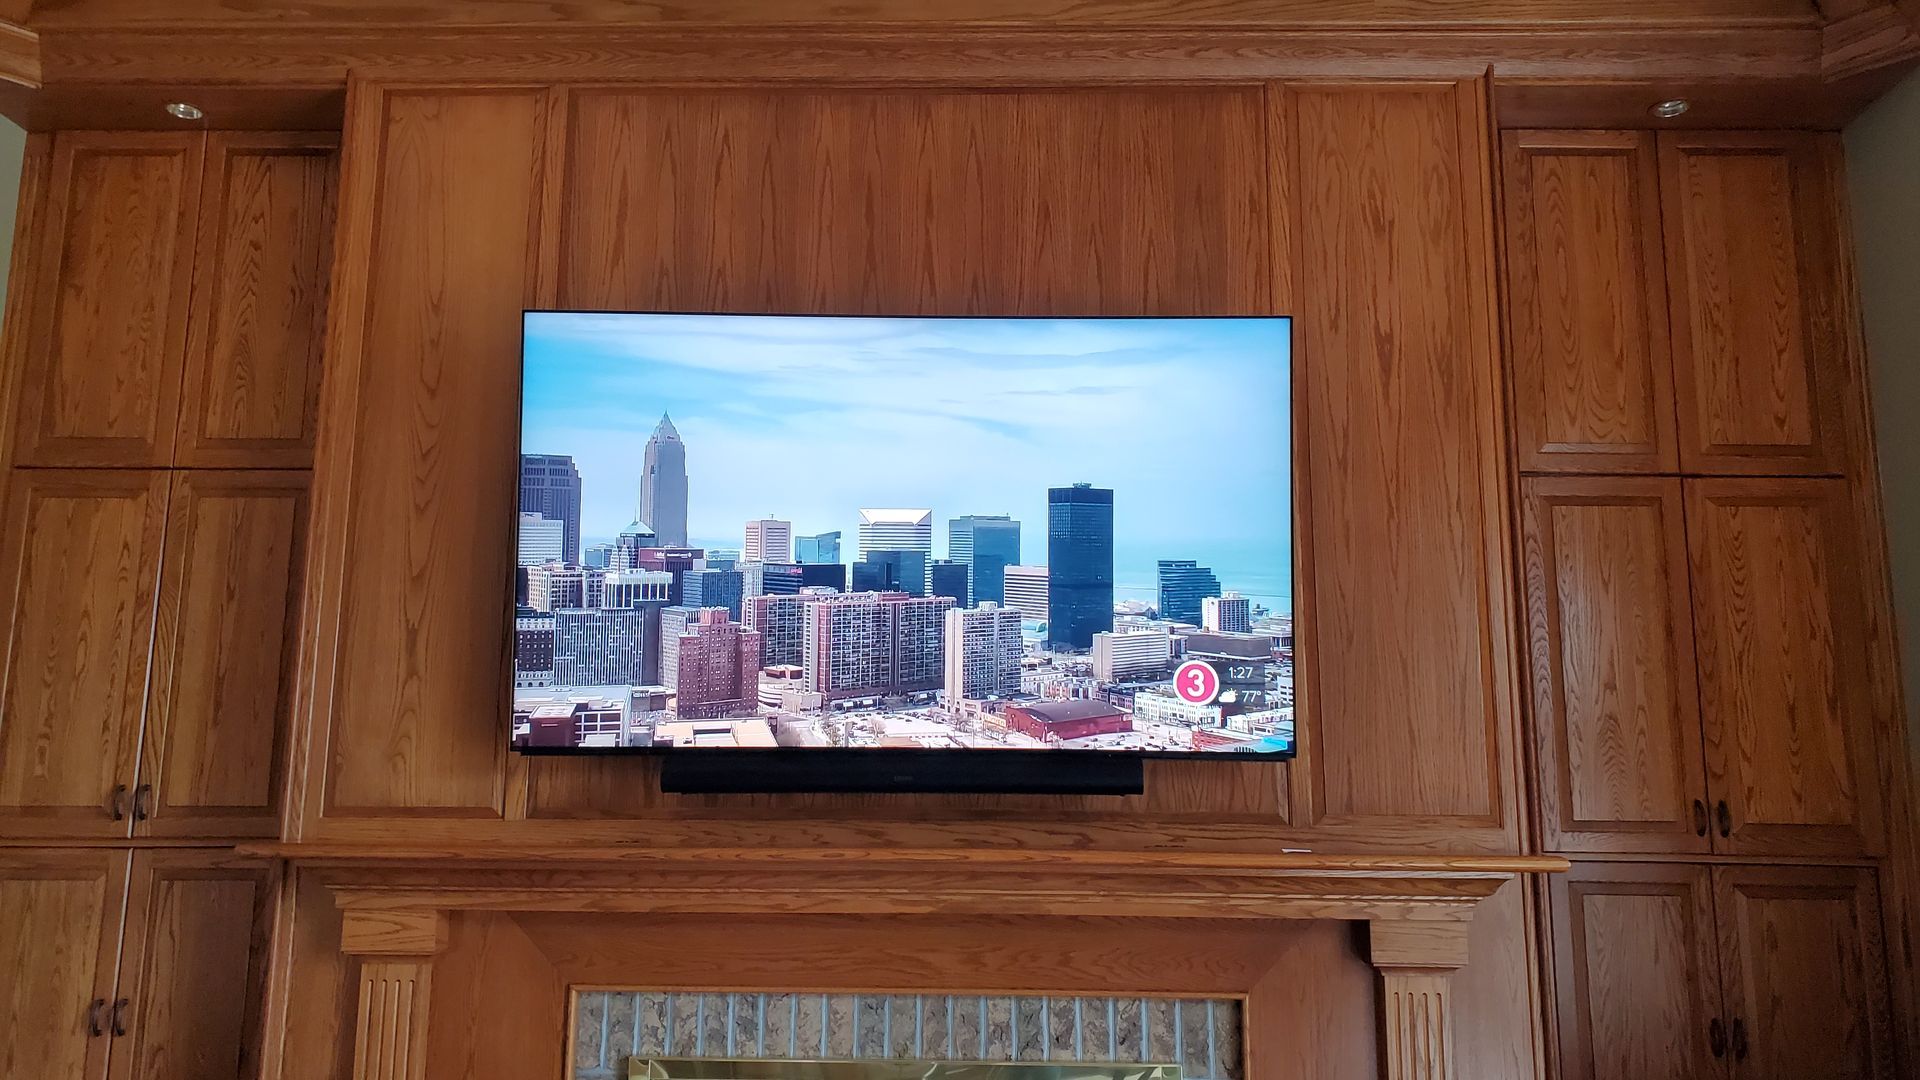 a flat screen tv and soundbar is mounted above a fireplace with installation by fisher electronics in northern ohio